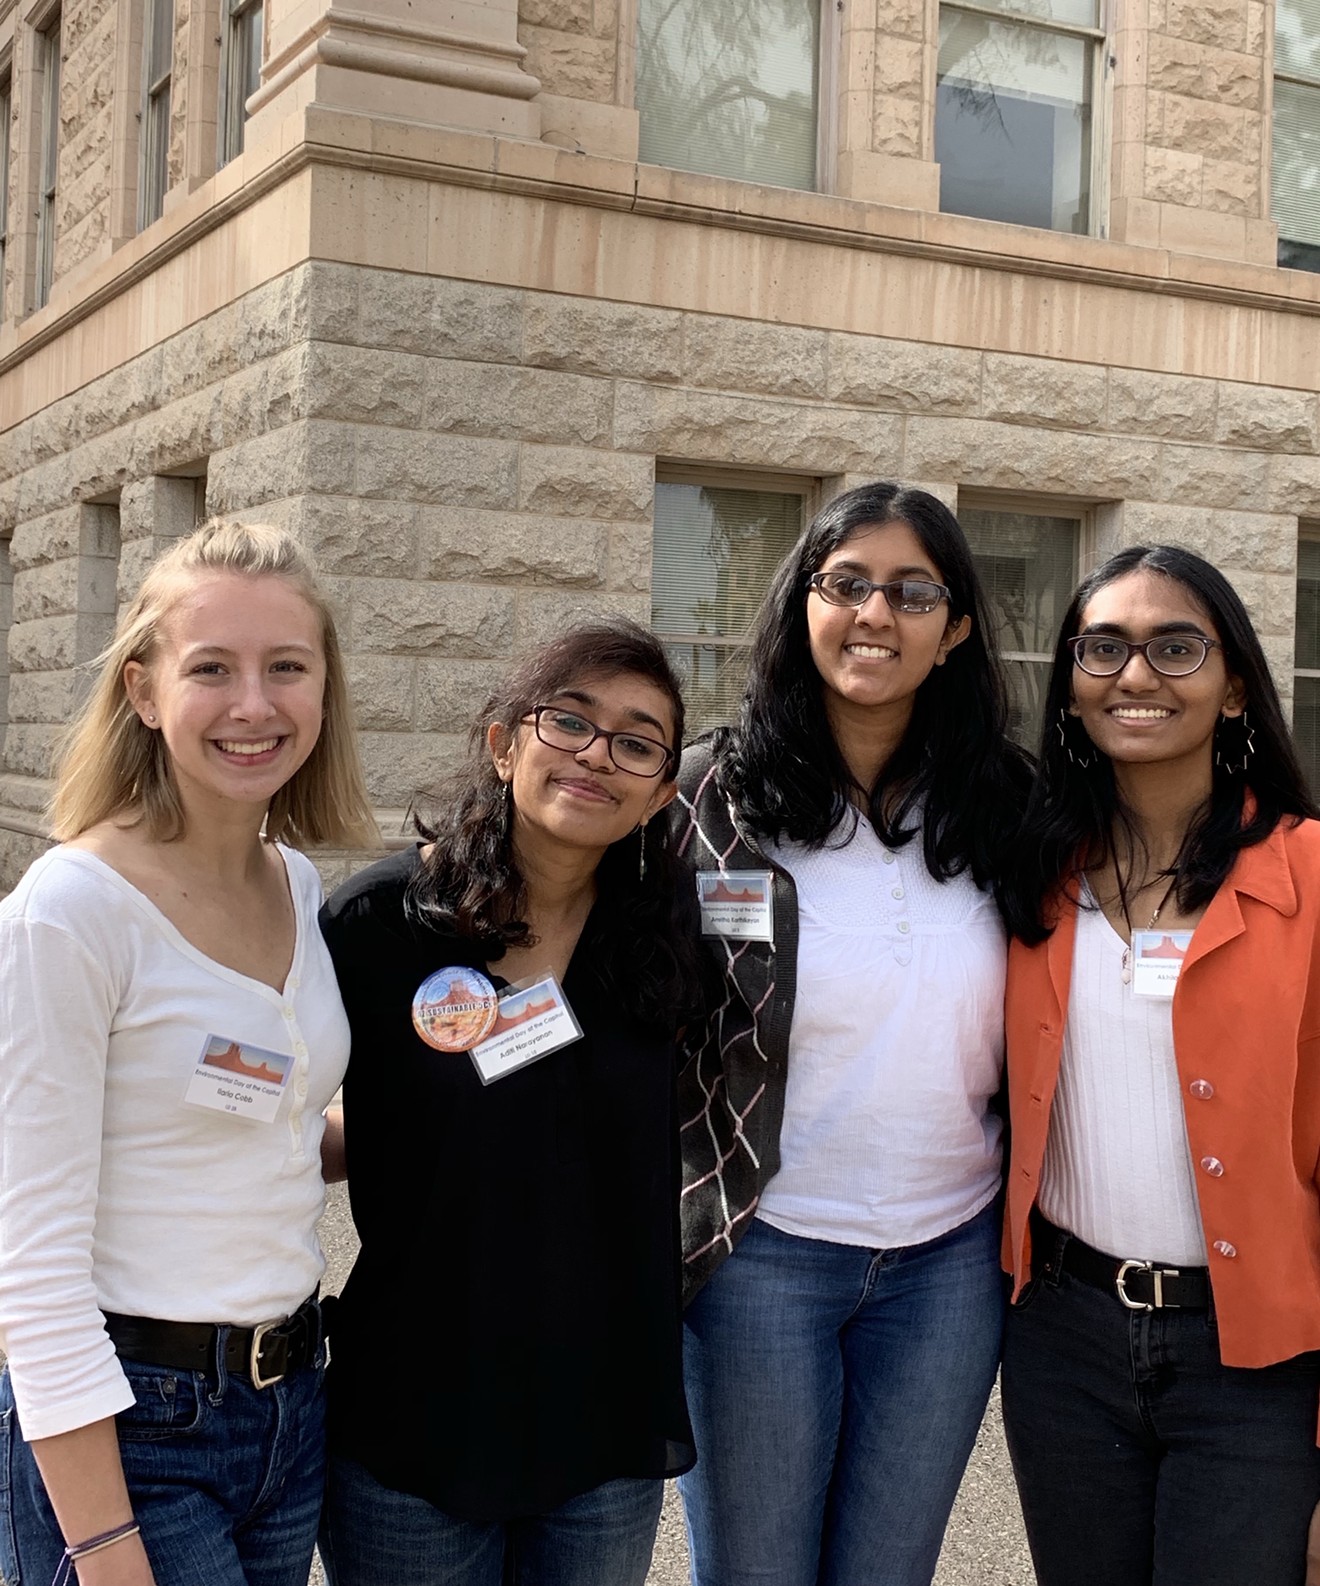 Arizona students at the Capitol earlier this month for Environmental Day. Students like Aditi Narayanan, second from left, are organizing a walkout to demand action on climate change.